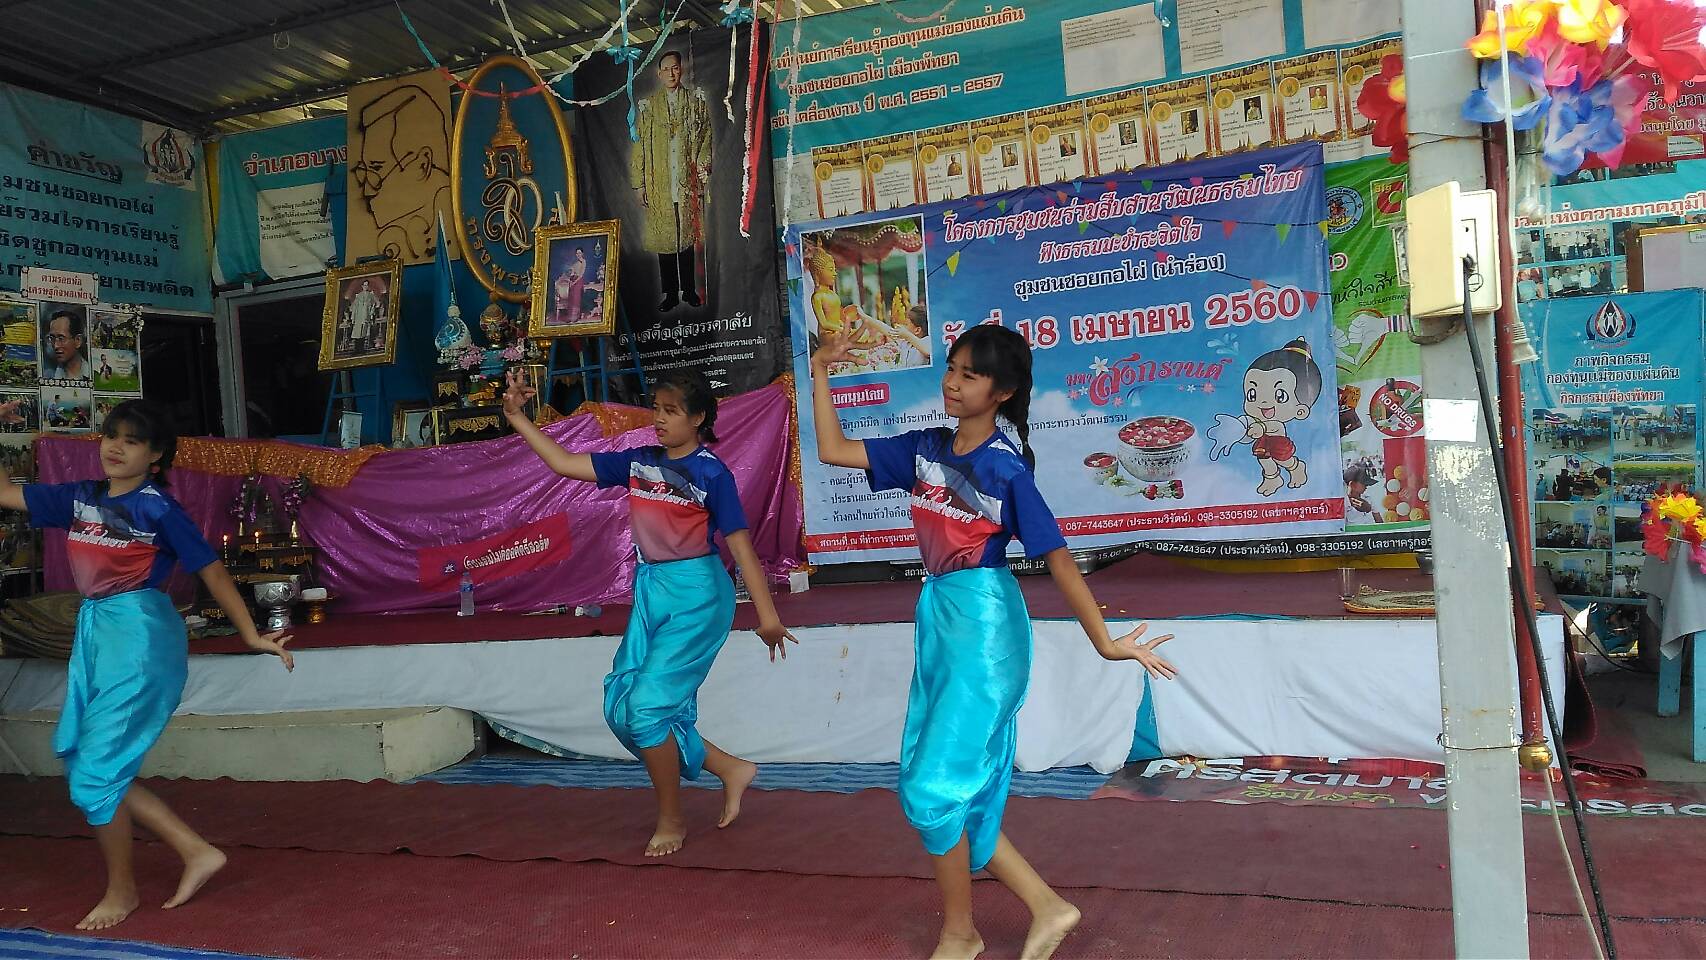 The Kophai and Chumsai communities also featured traditional Thai dance by some of the local students.